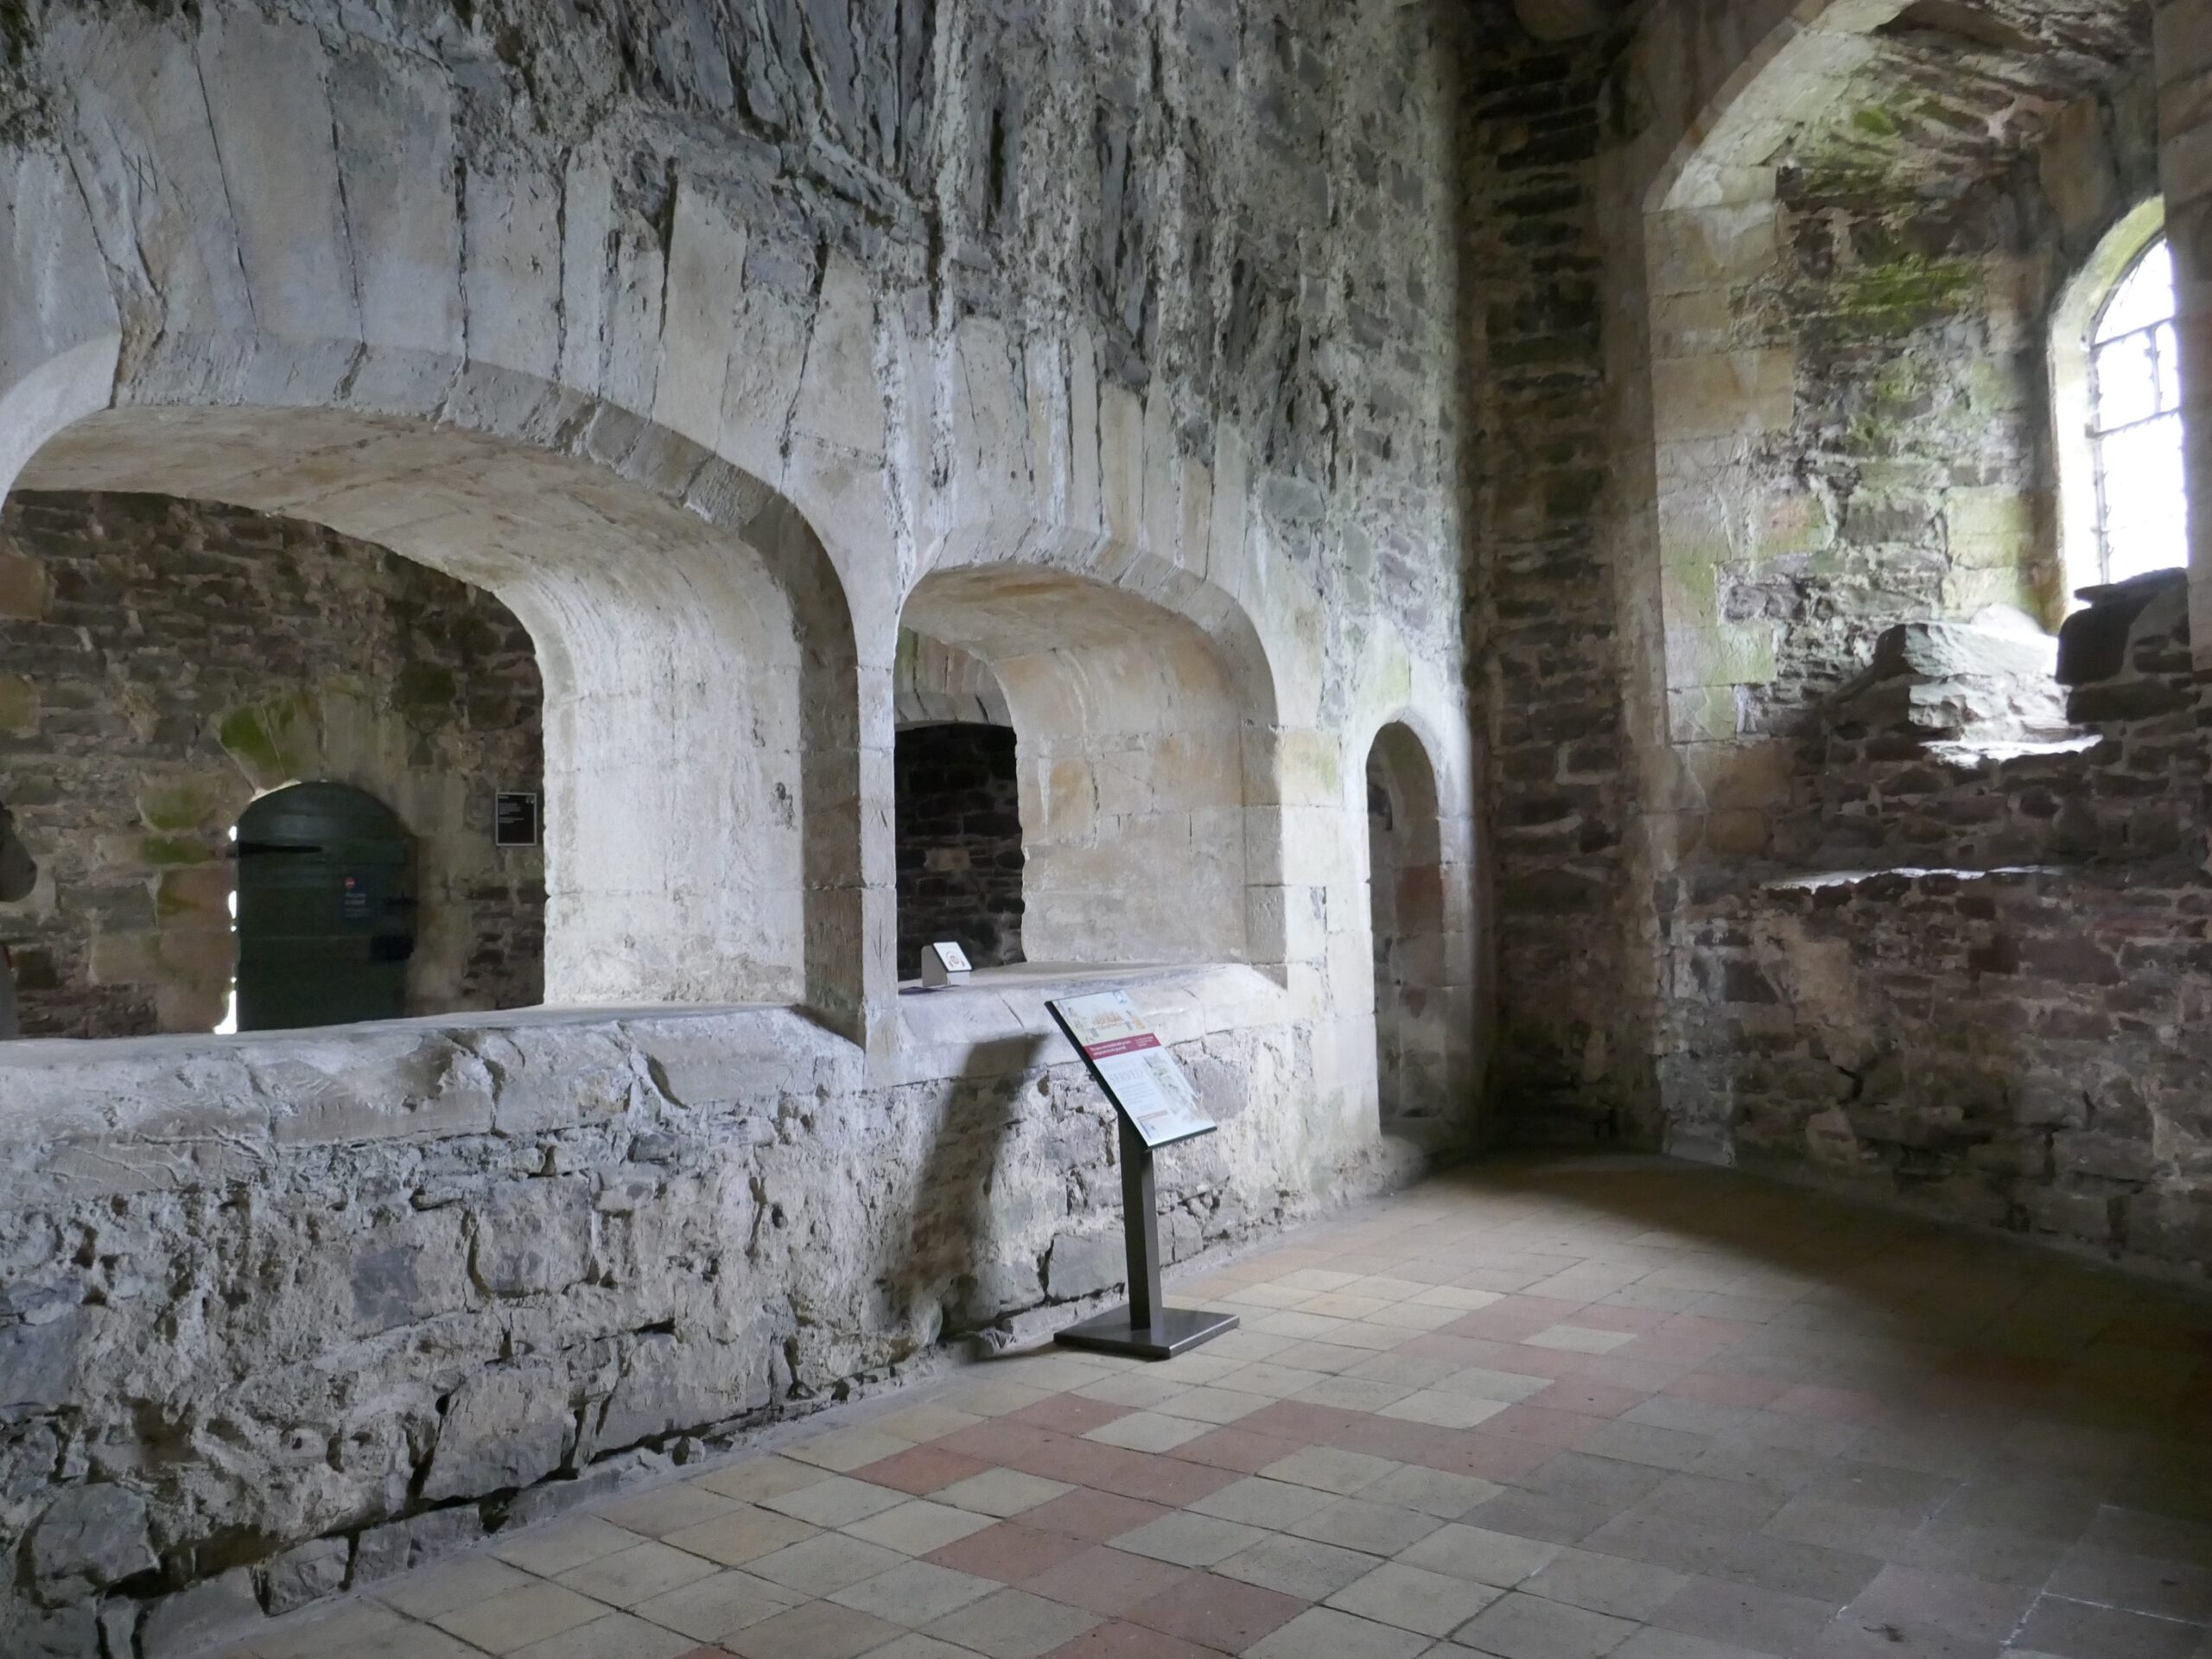 The space where the kitchen would have been with *its arched windows at Doune Castle.